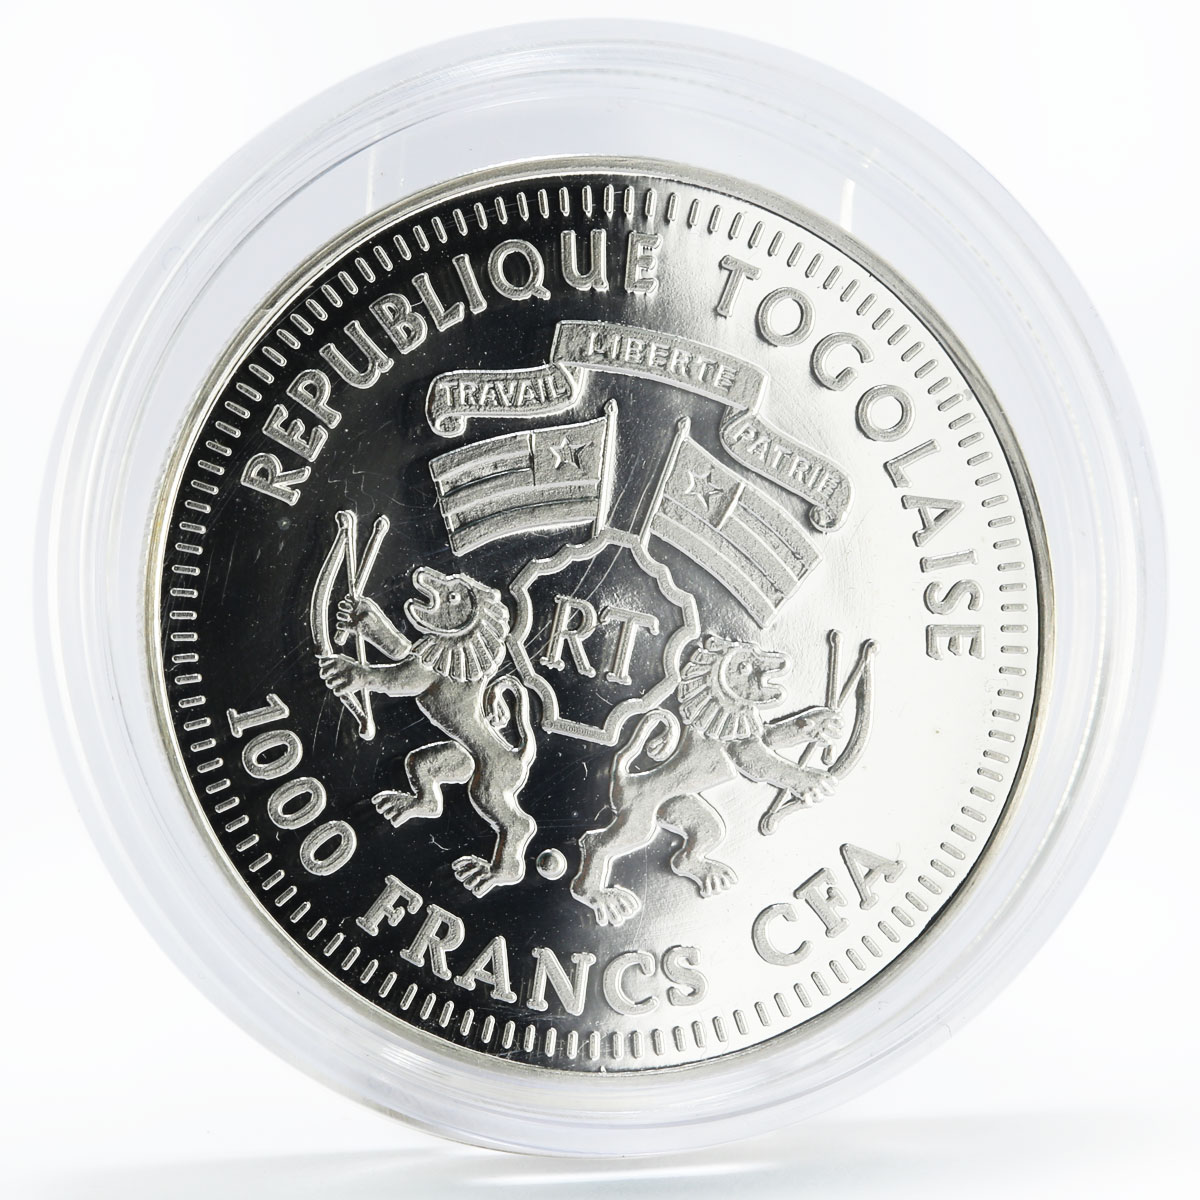 Togo 1000 francs History in Ships series Pommern 1903 proof silver coin 2011